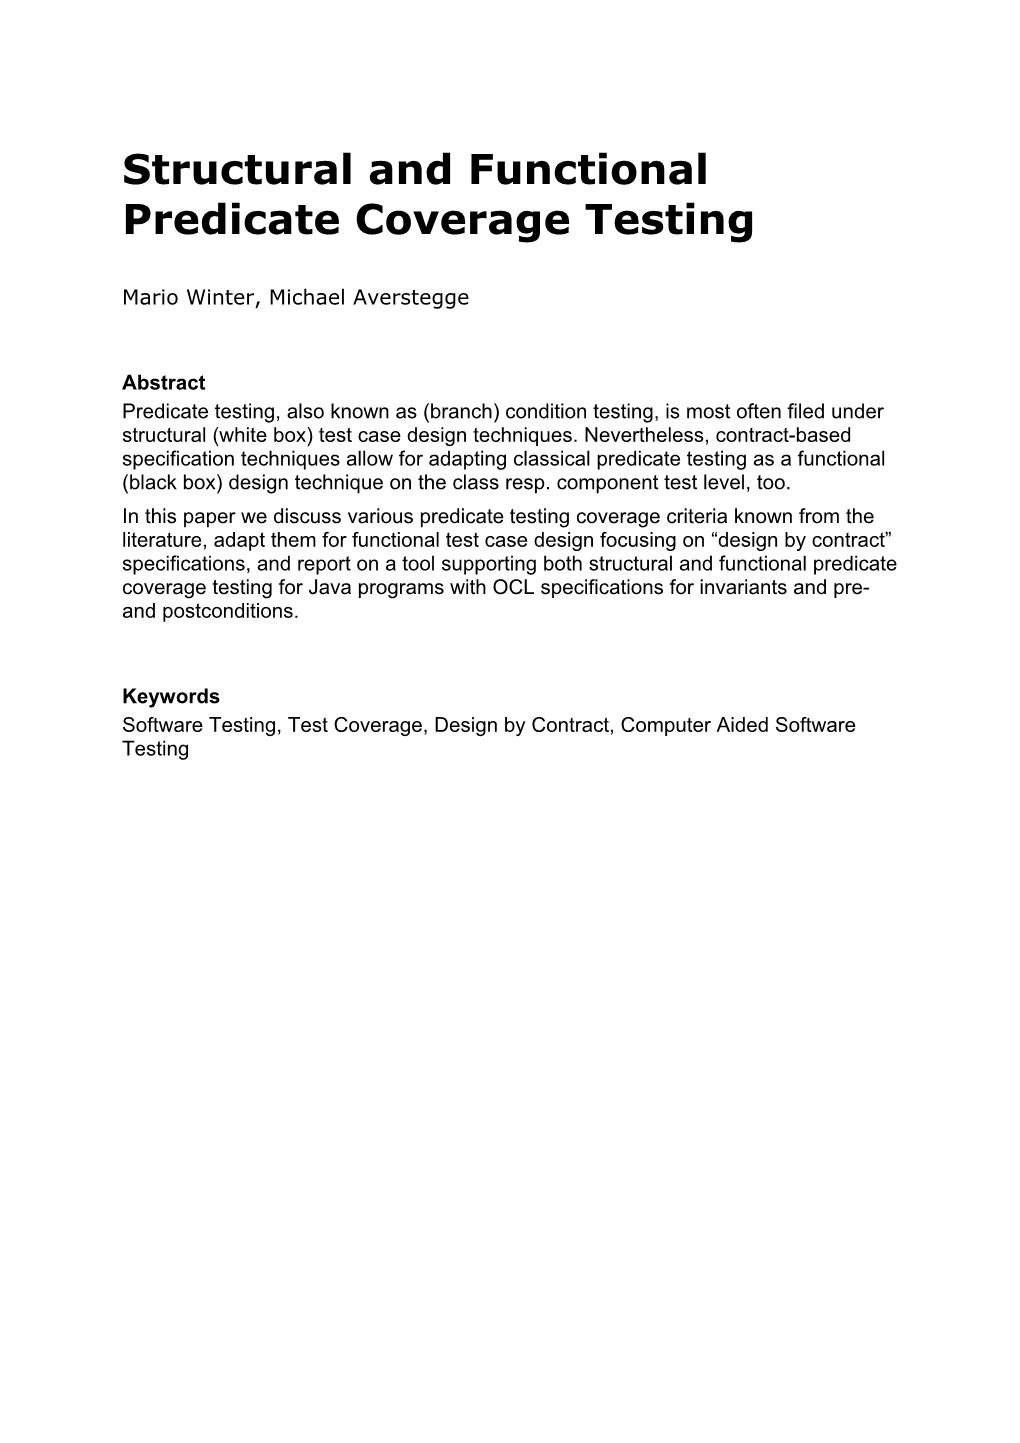 Structural and Functional Predicate Coverage Testing